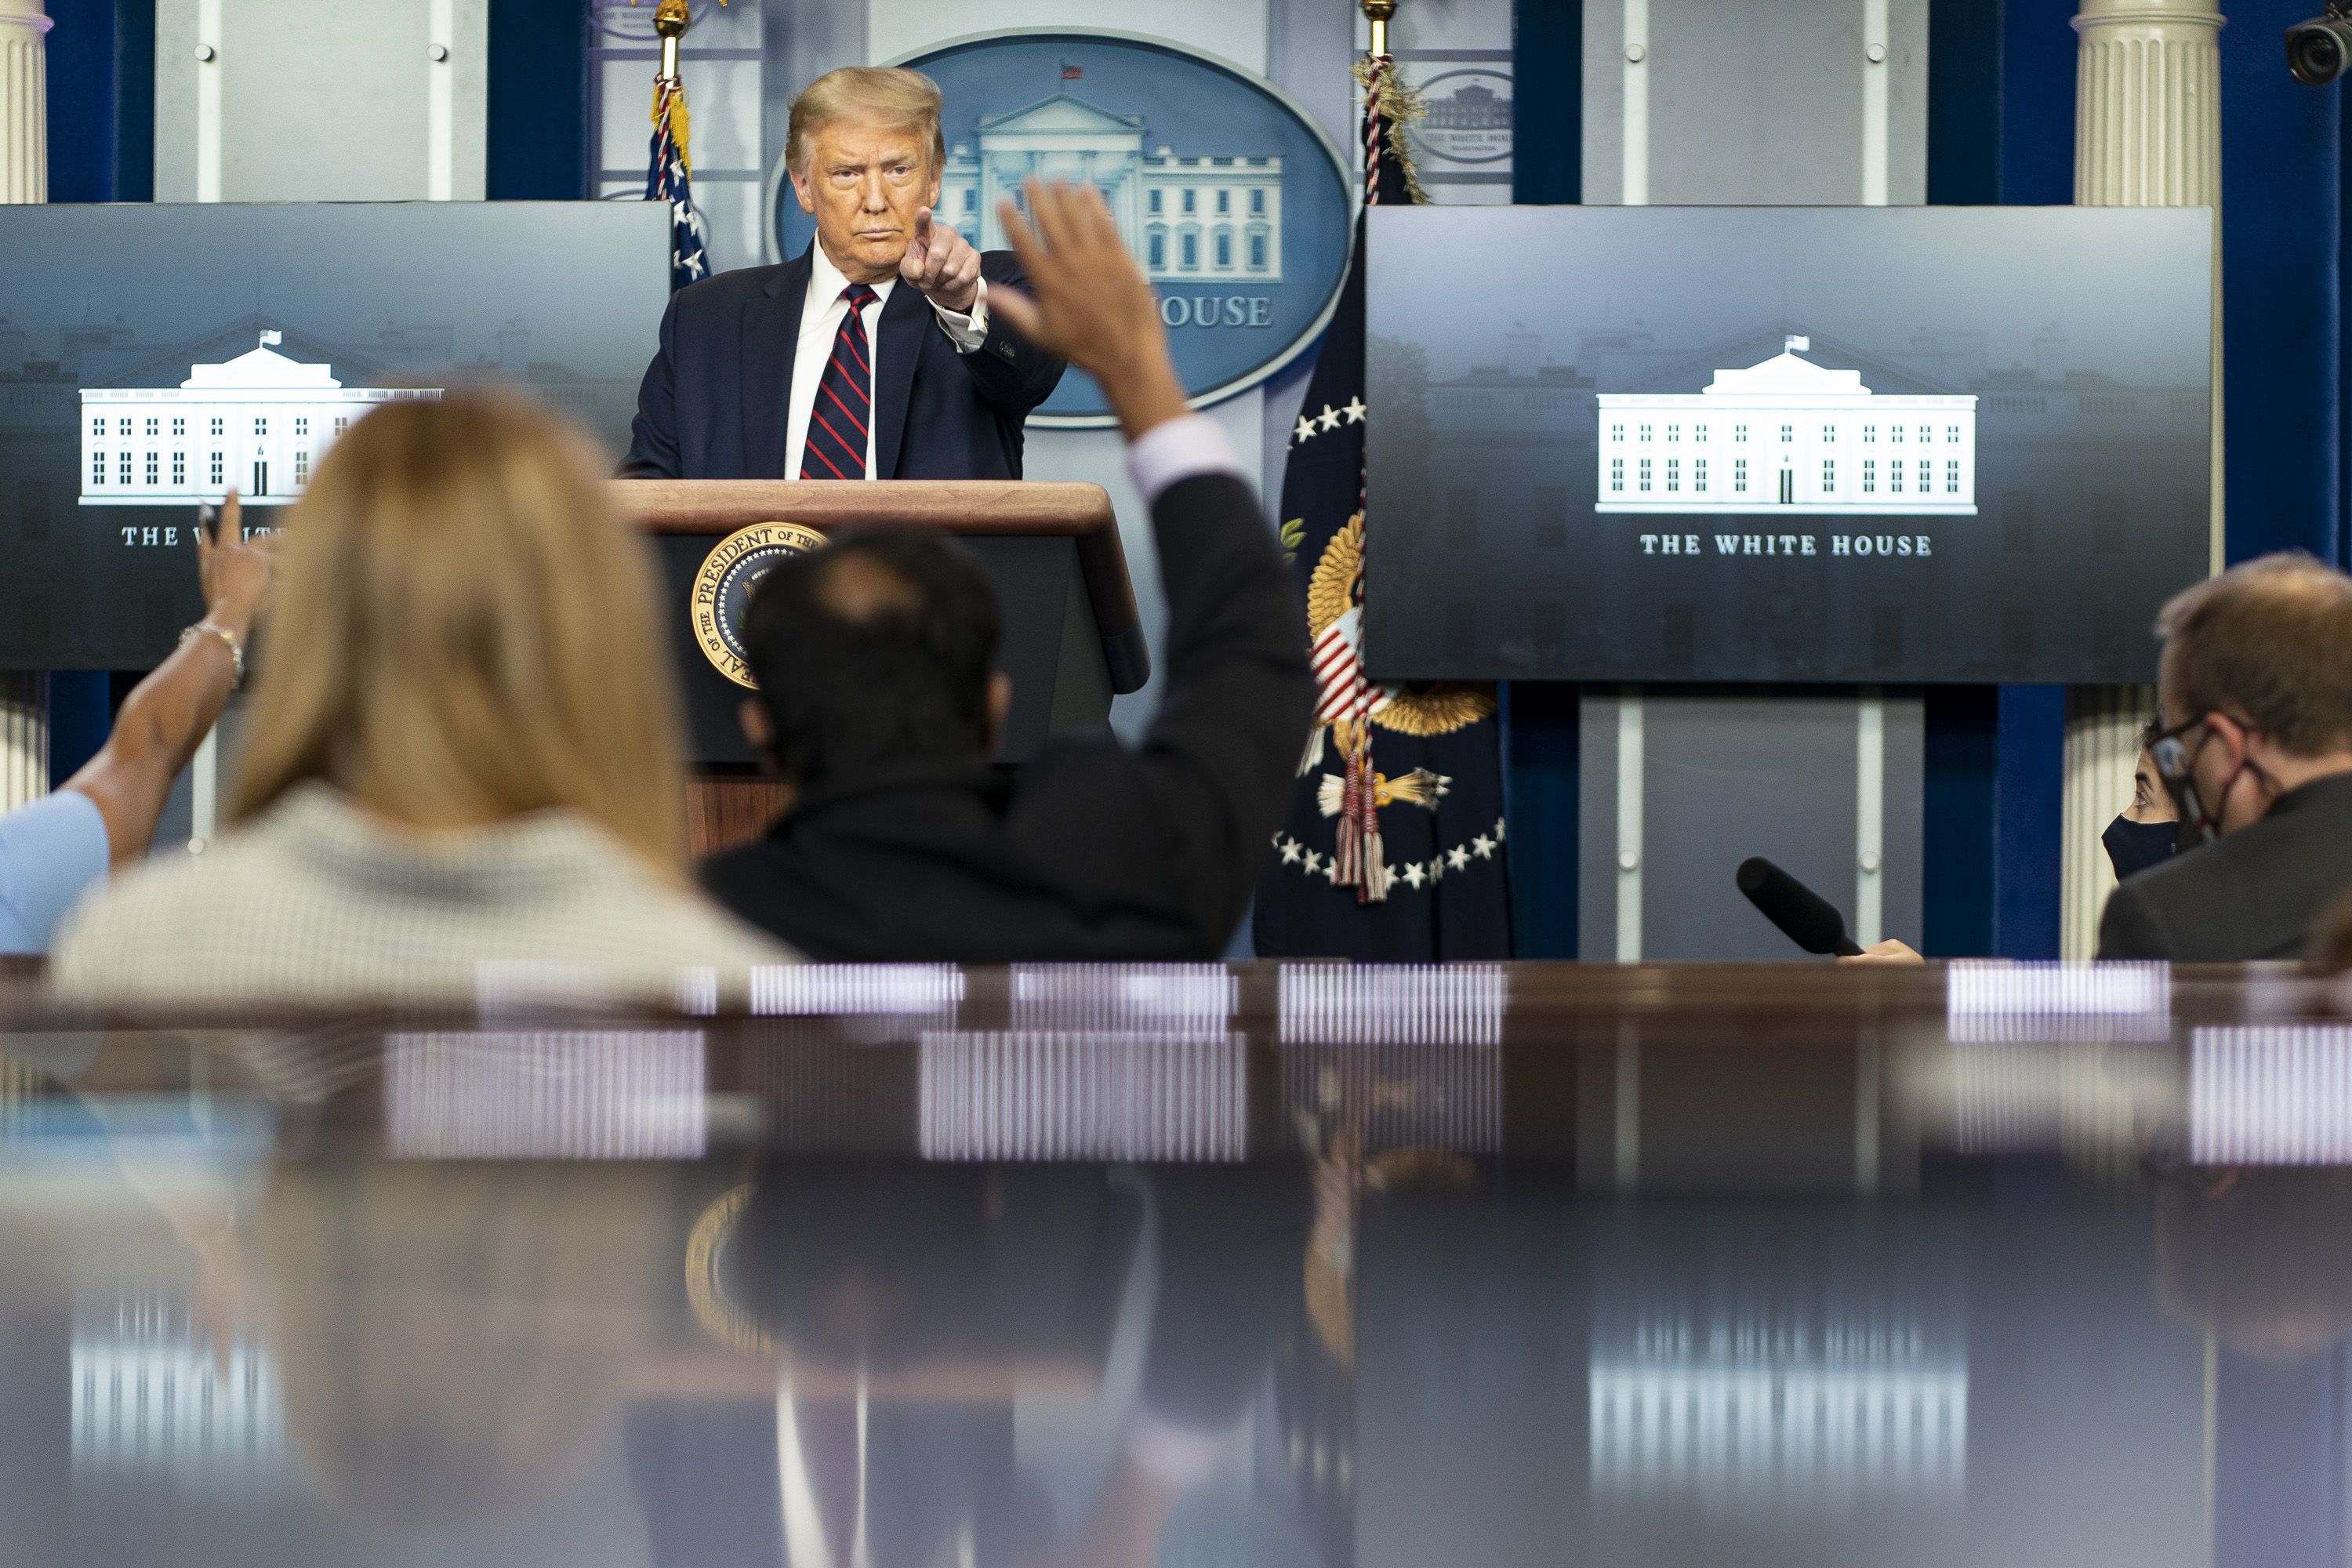 22/07/2020 HANDOUT - 22 July 2020, US, Washington: US President Donald Trump delivers remarks and answers questions during a Coronavirus (Covid-19) updates press conference at the James Brady White House Press Briefing Room. Photo: Shealah Craighead/White House/dpa - ATTENTION: editorial use only and only if the credit mentioned above is referenced in full POLITICA INTERNACIONAL Shealah Craighead/White House/dp / DPA 